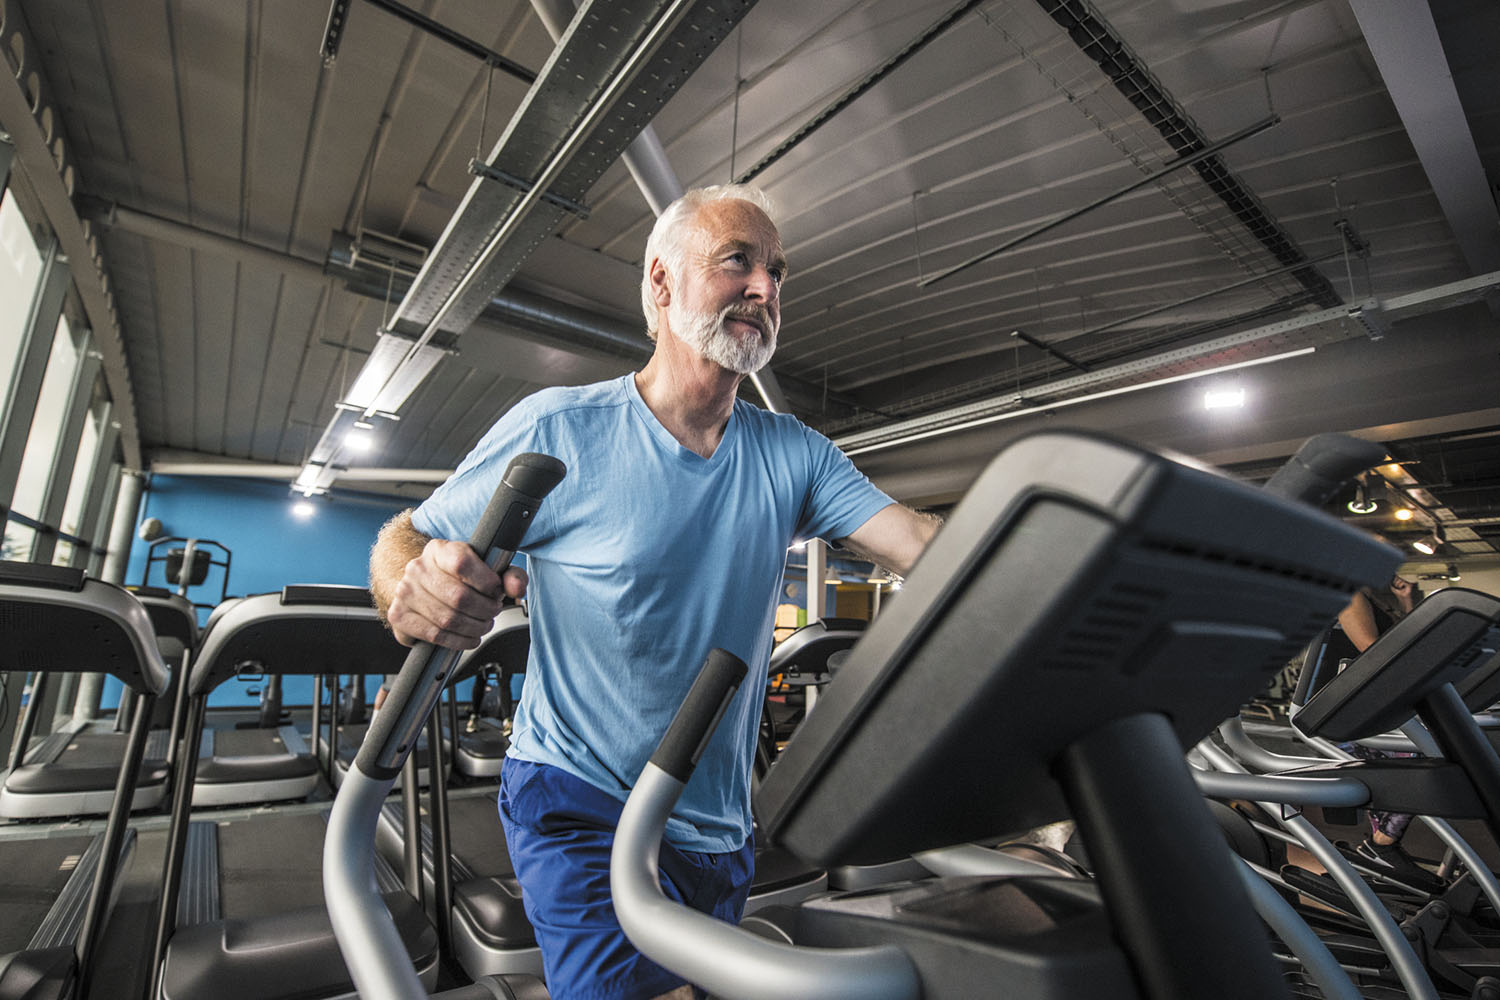 Get Moving To Slow Cardiovascular Aging Harvard Health